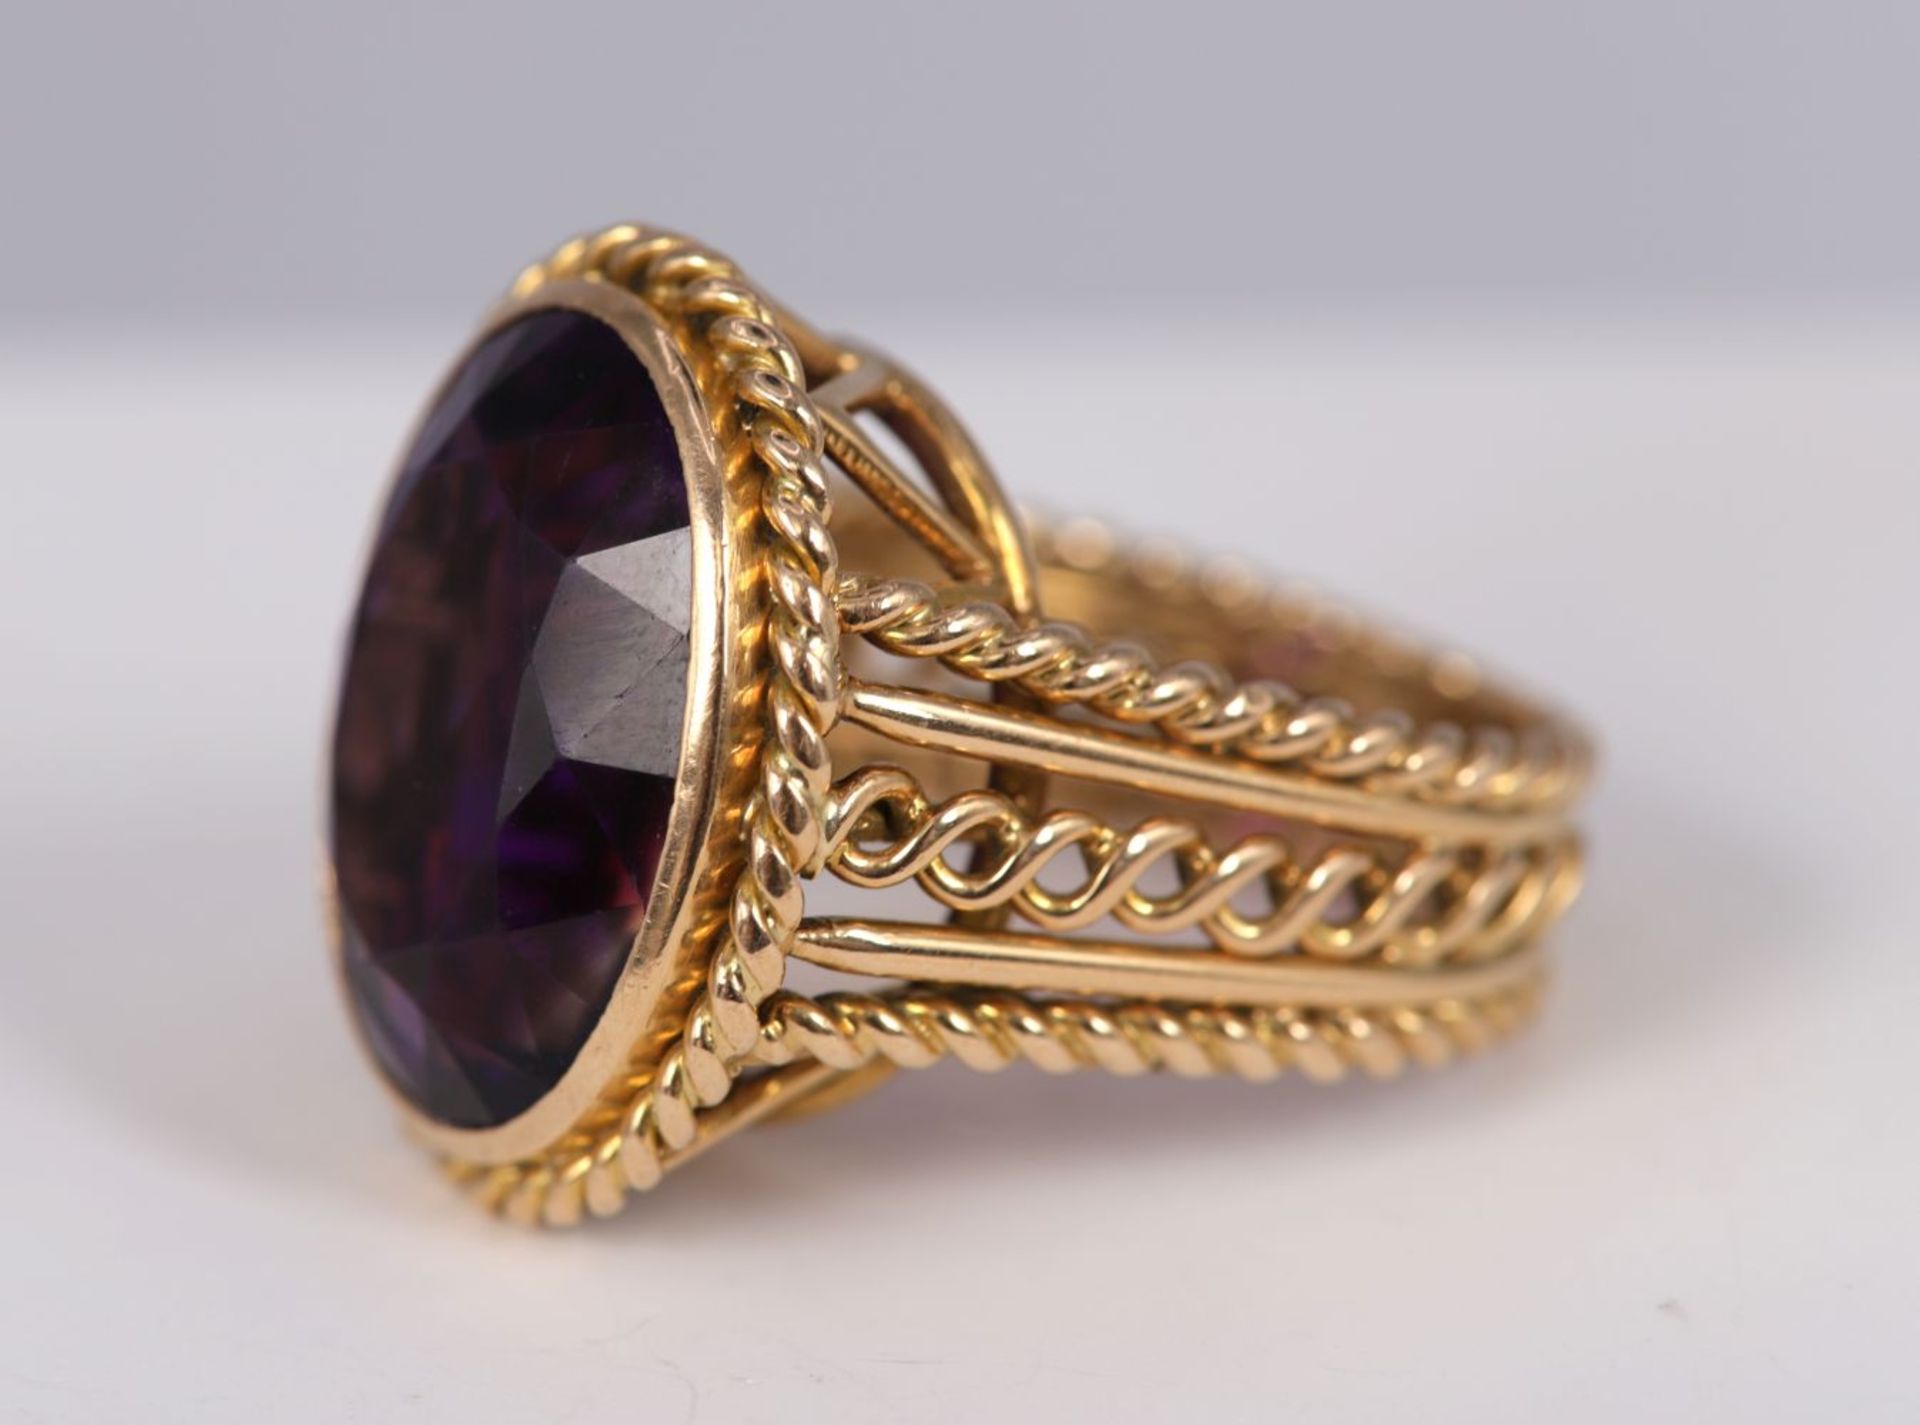 18K YELLOW GOLD & AMETHYST RING - Image 2 of 3